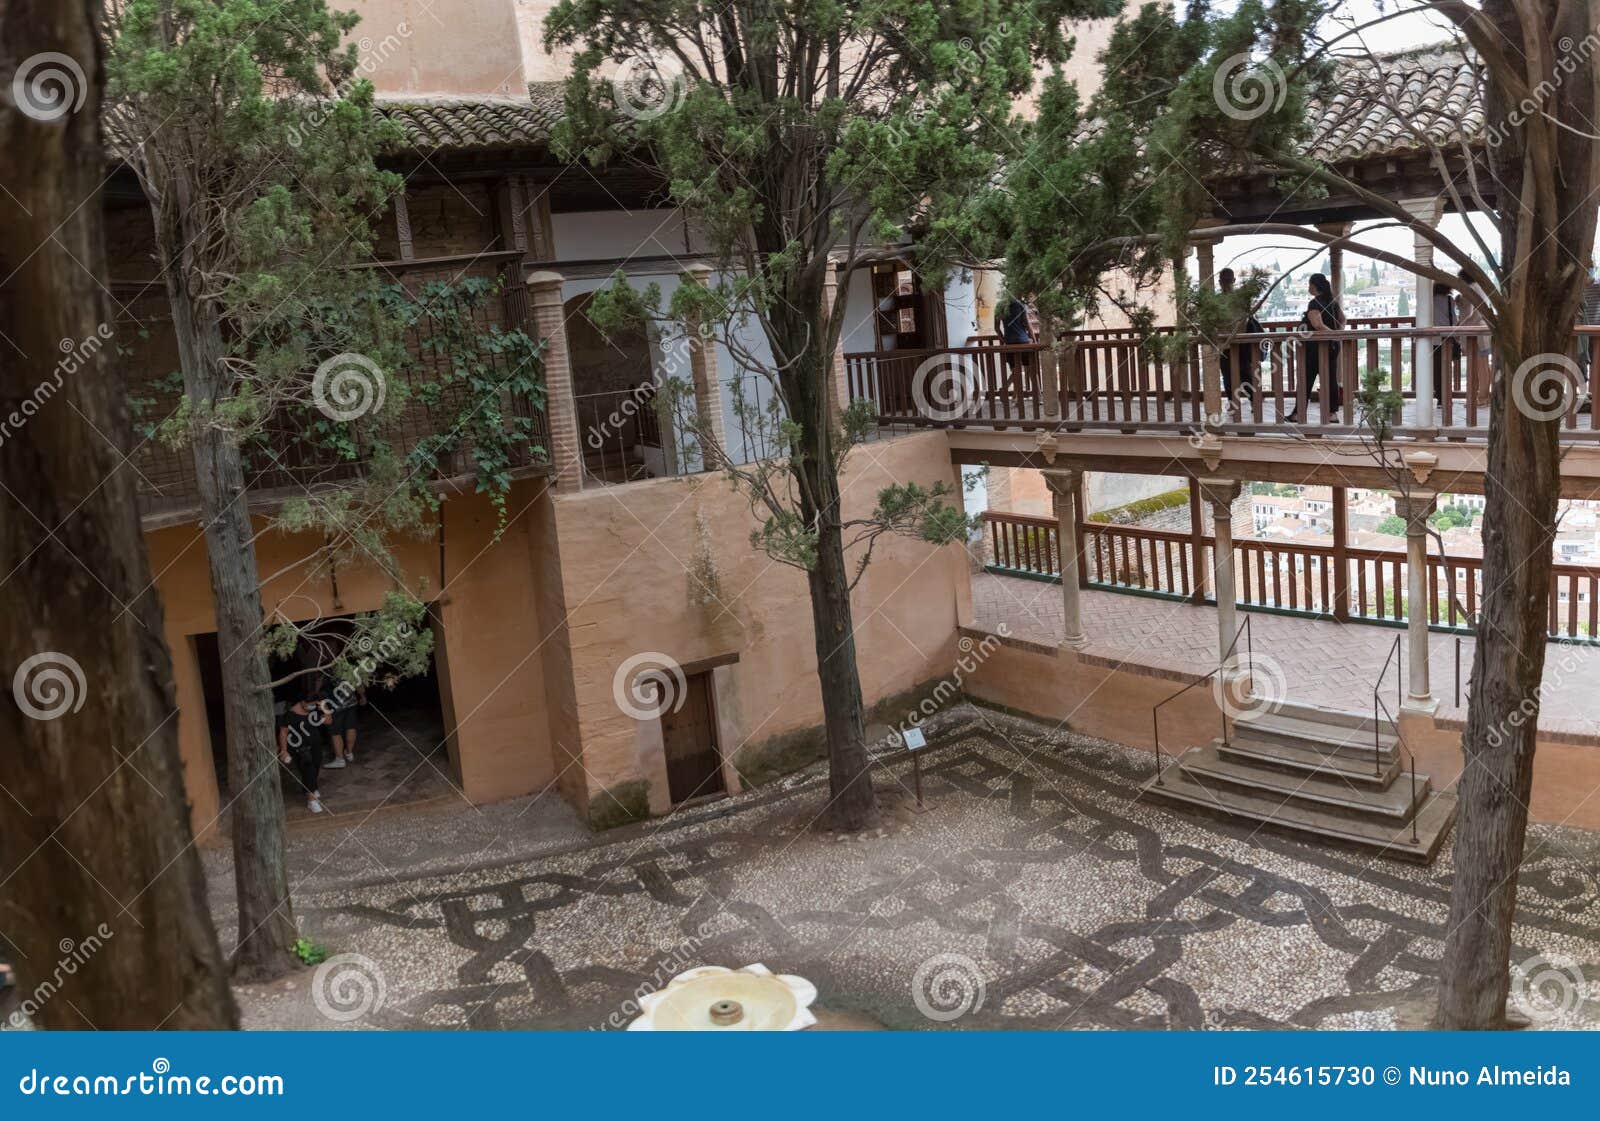 view at the wrought iron grille, called patio de la reja, on nasrid palaces inside the alhambra fortress complex located in